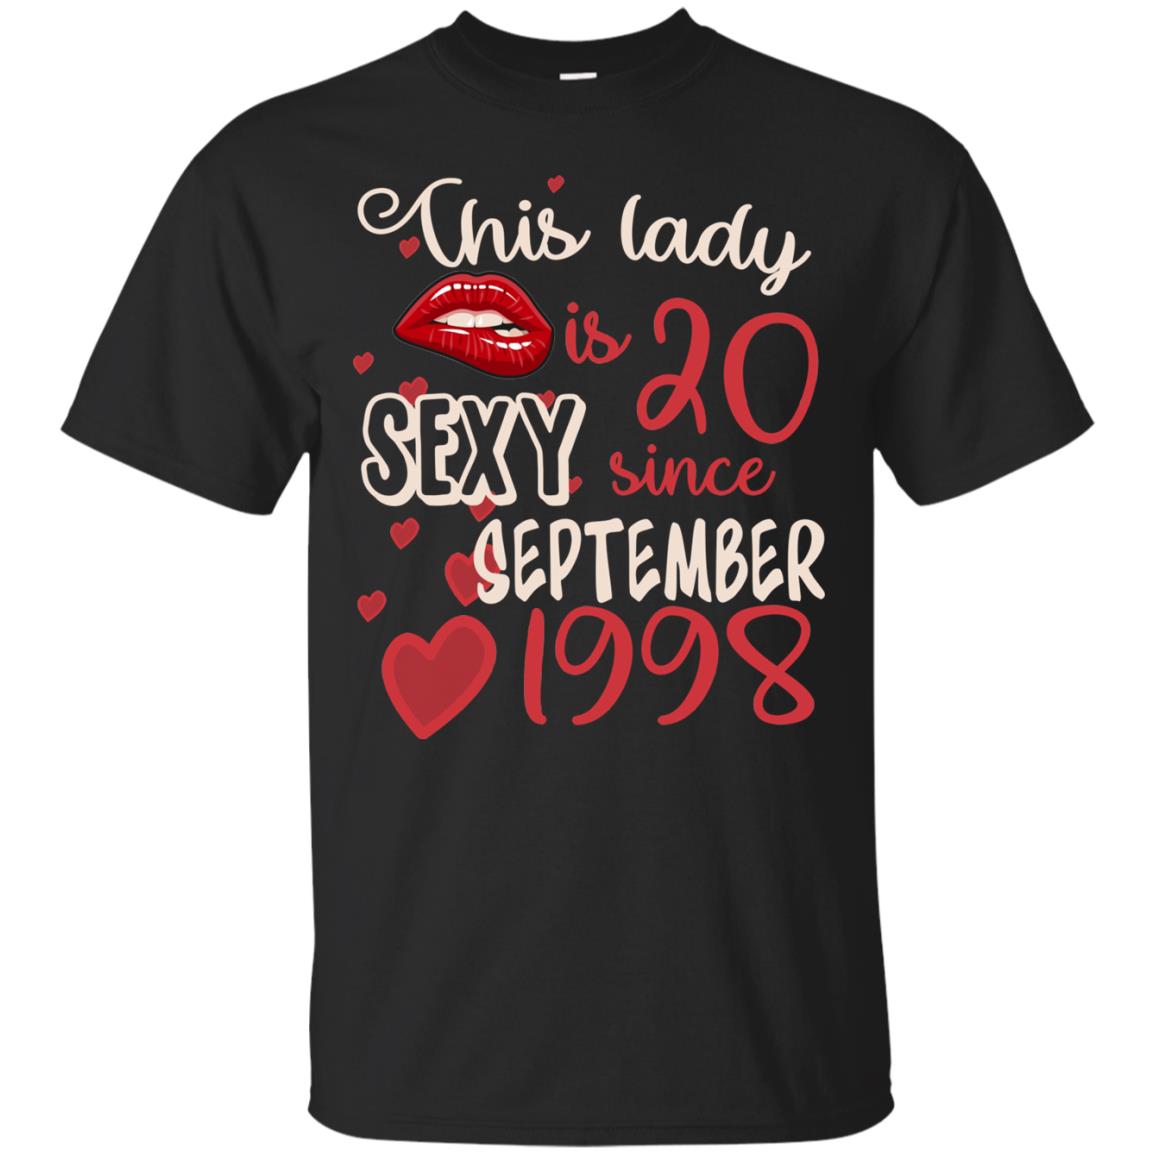 This Lady Is 20 Sexy Since September 1998 20th Birthday Shirt For September WomensG200 Gildan Ultra Cotton T-Shirt